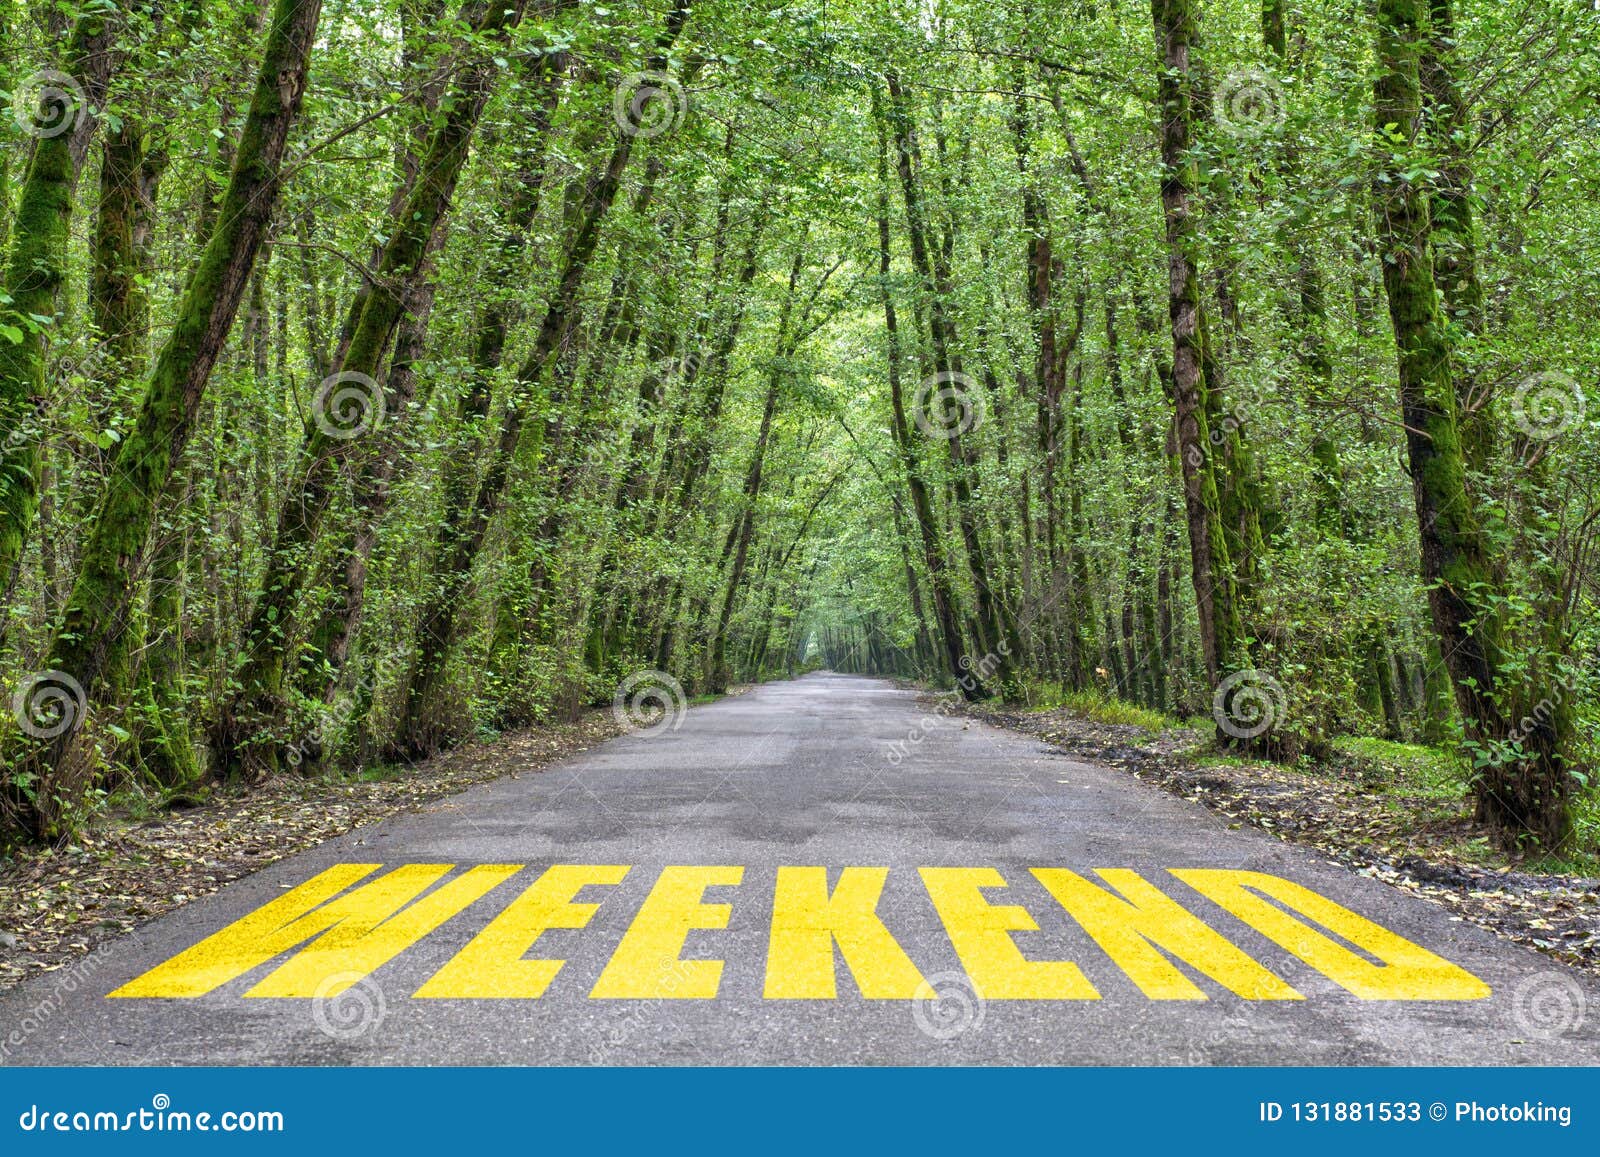 jungle road to weekend